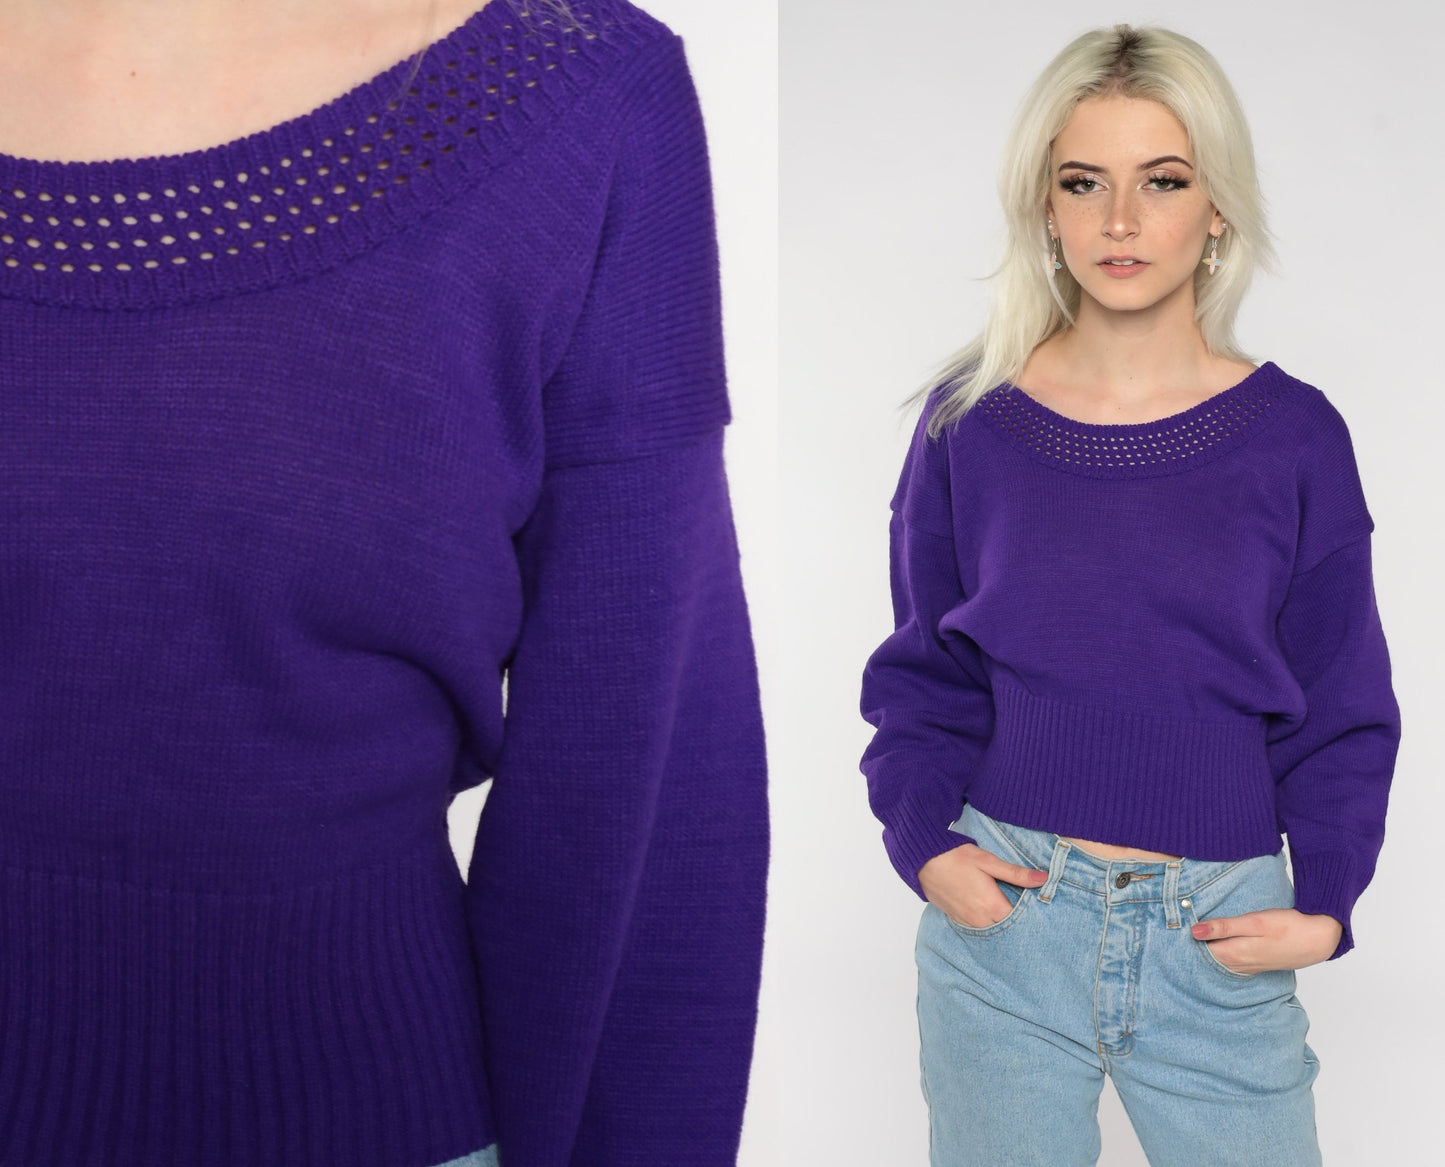 Purple Knit Sweater 80s Cutout Cropped Sweater Slouchy Knit Pullover Jumper 1980s Vintage Knitwear Basic Retro Normcore Medium Large M L